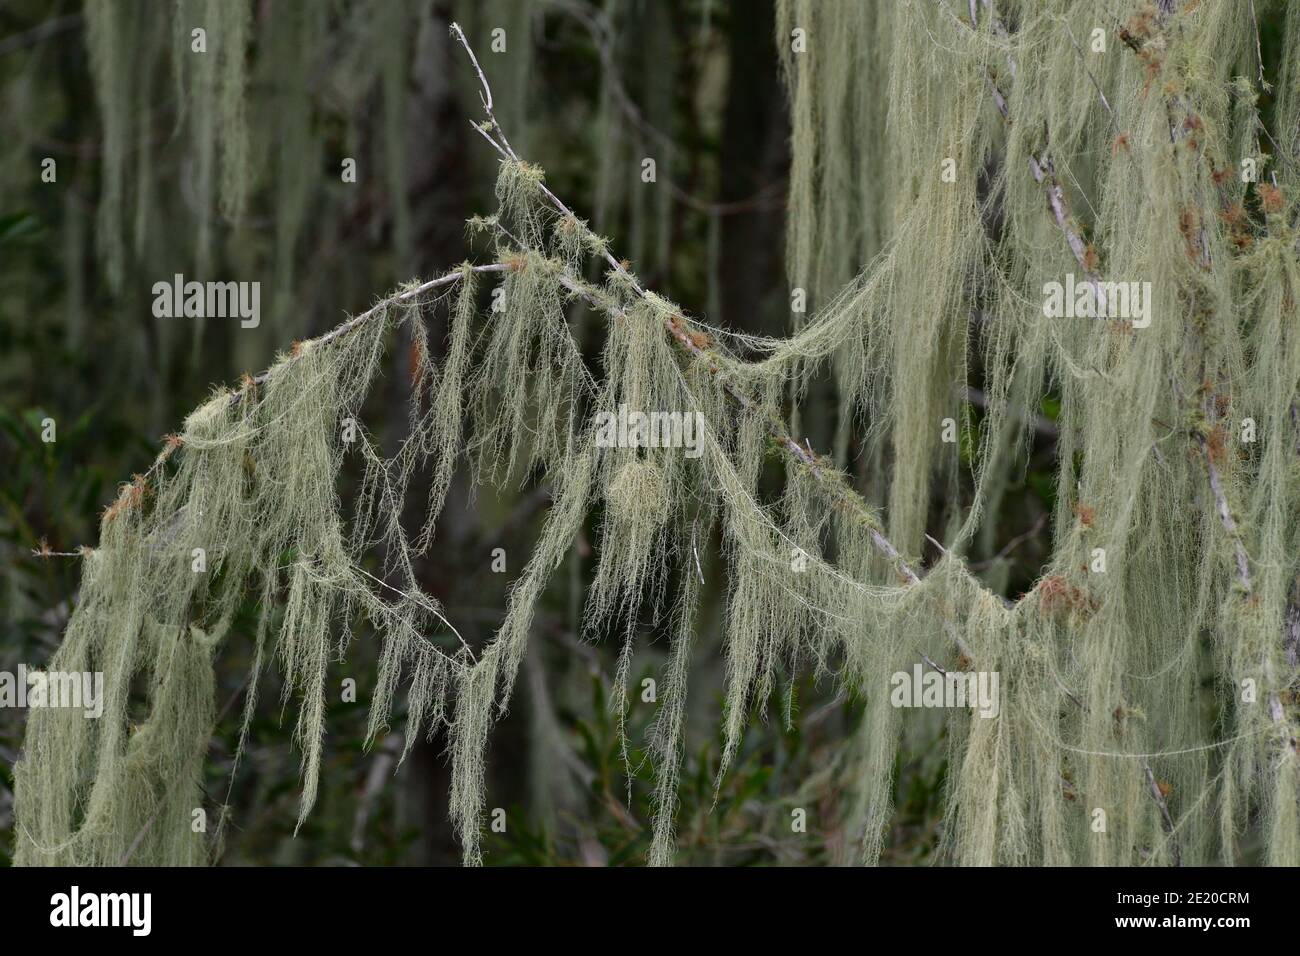 Myrtle Beach SC - Sign of the South - Spanish Moss (Tillandsia